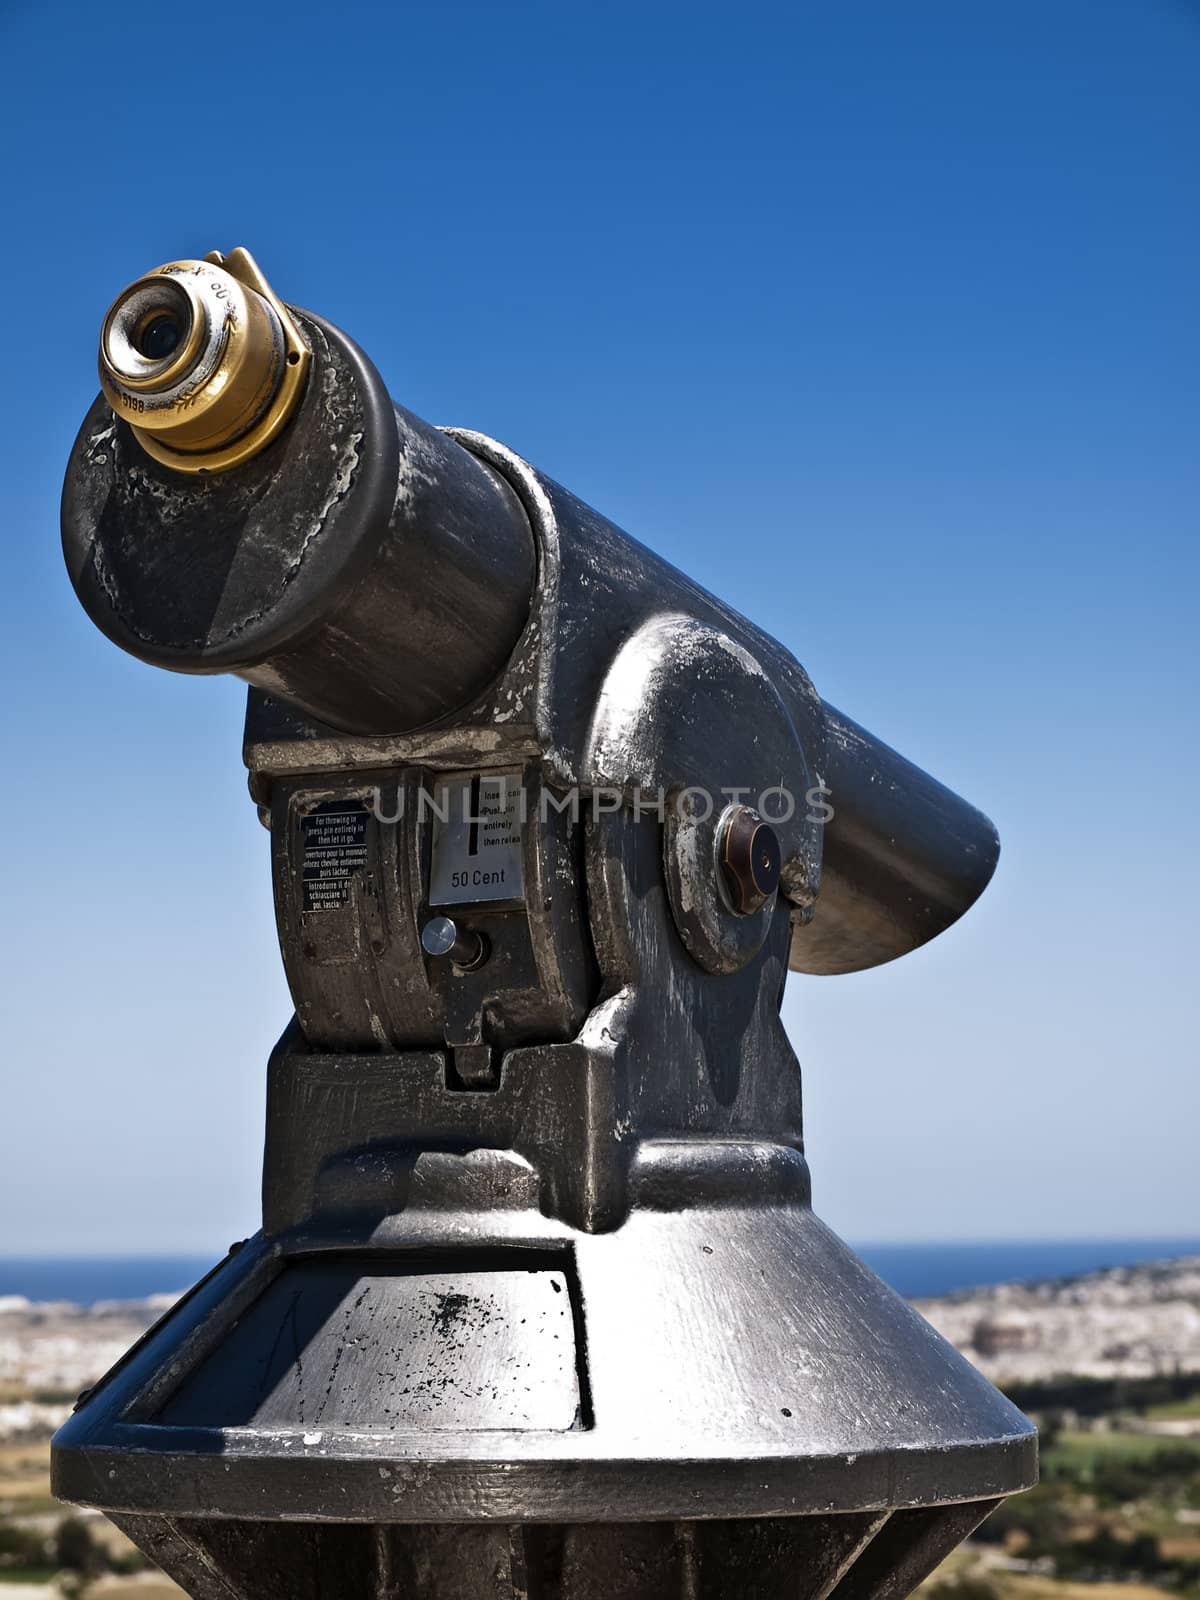 Vintage telescope for use by people wanting to pay to watch the view from Mdina bastions in Malta